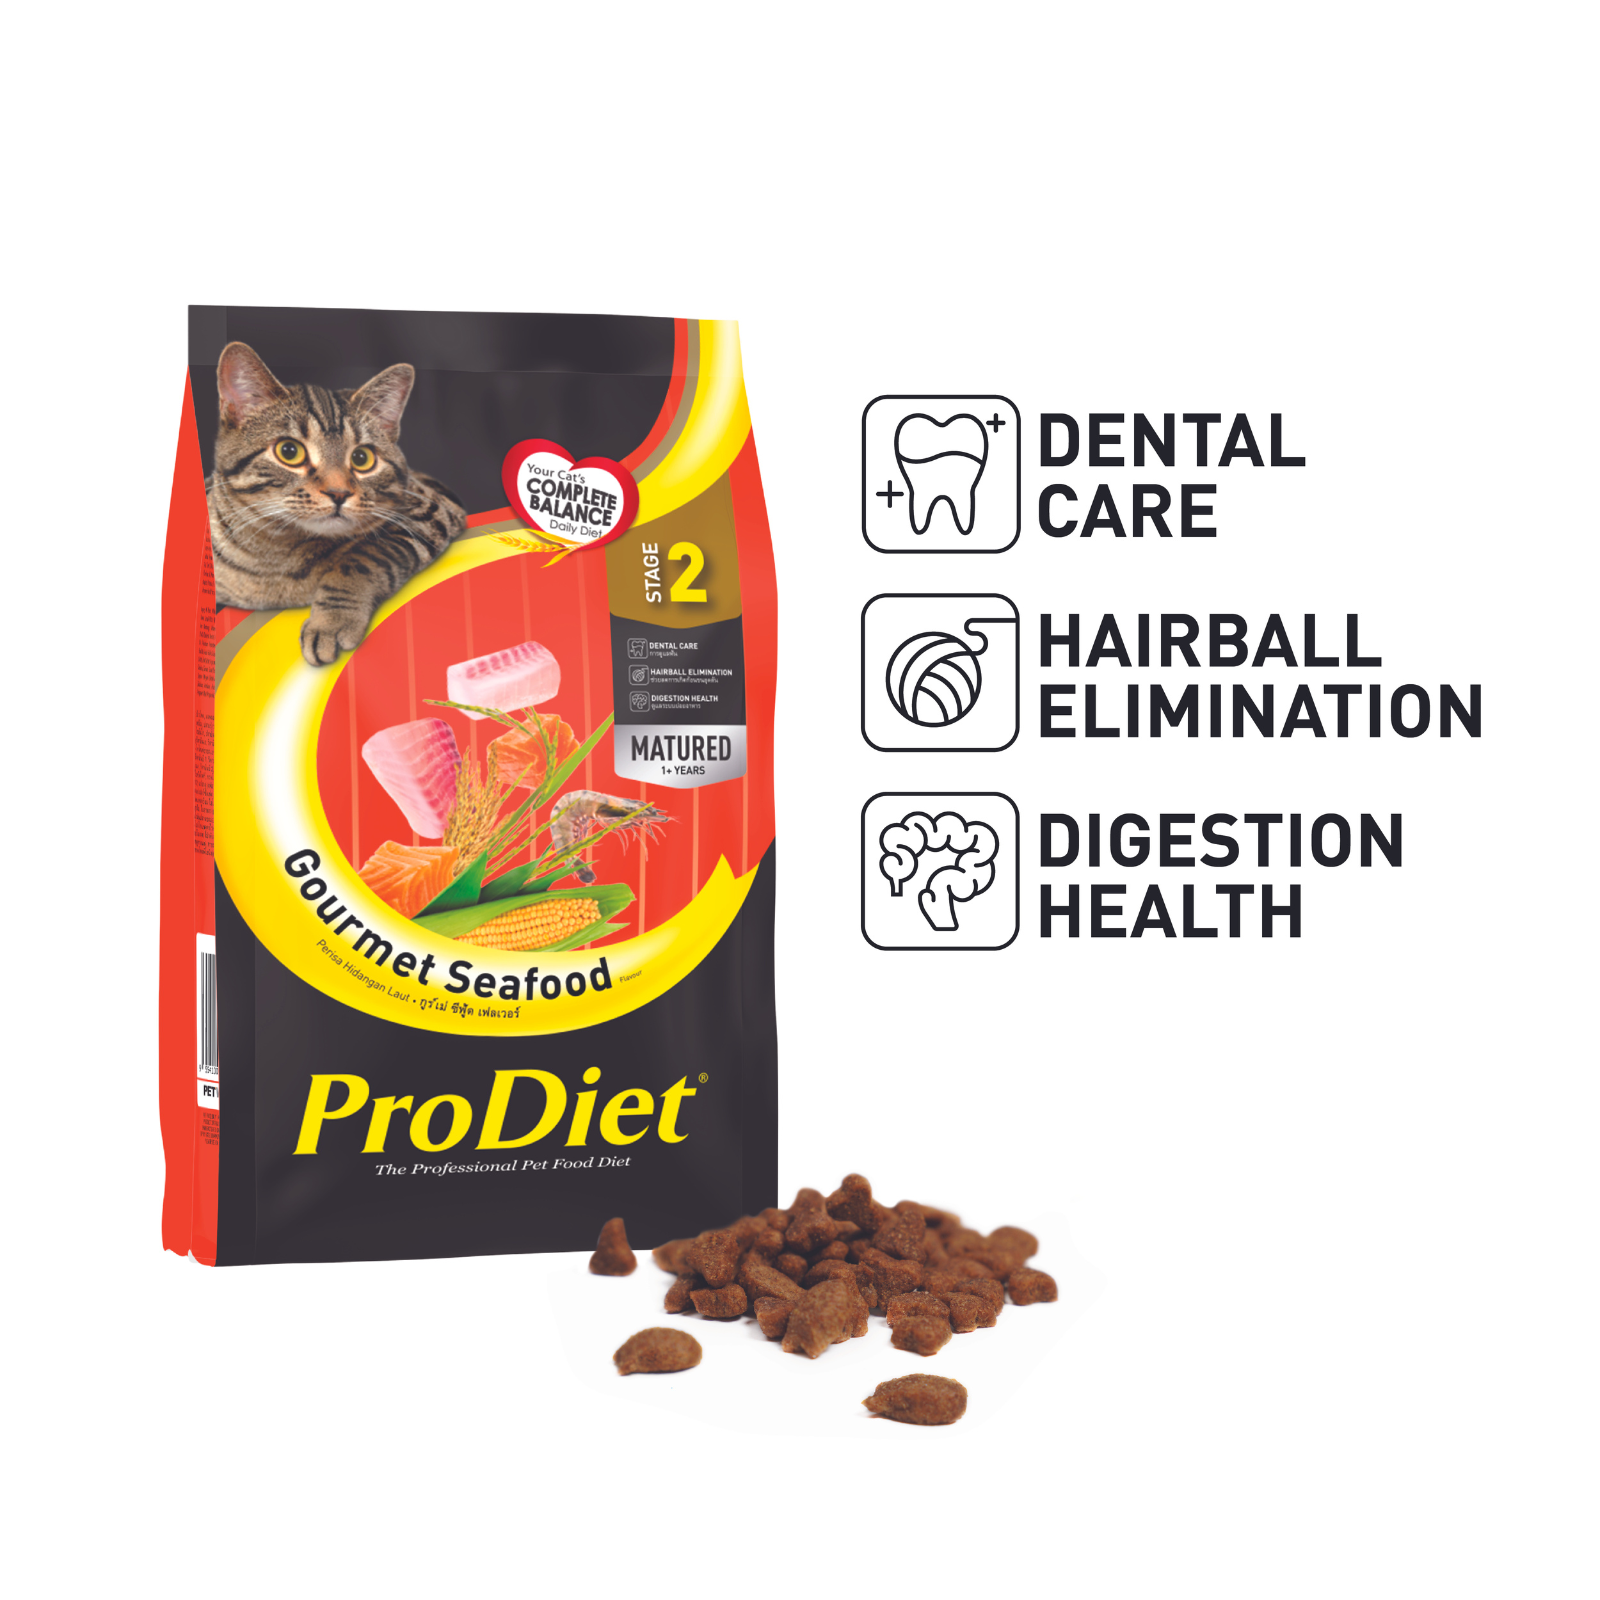 [BUY2FREE1] ProDiet 500G Dry Cat Food (Gourmet Seafood)